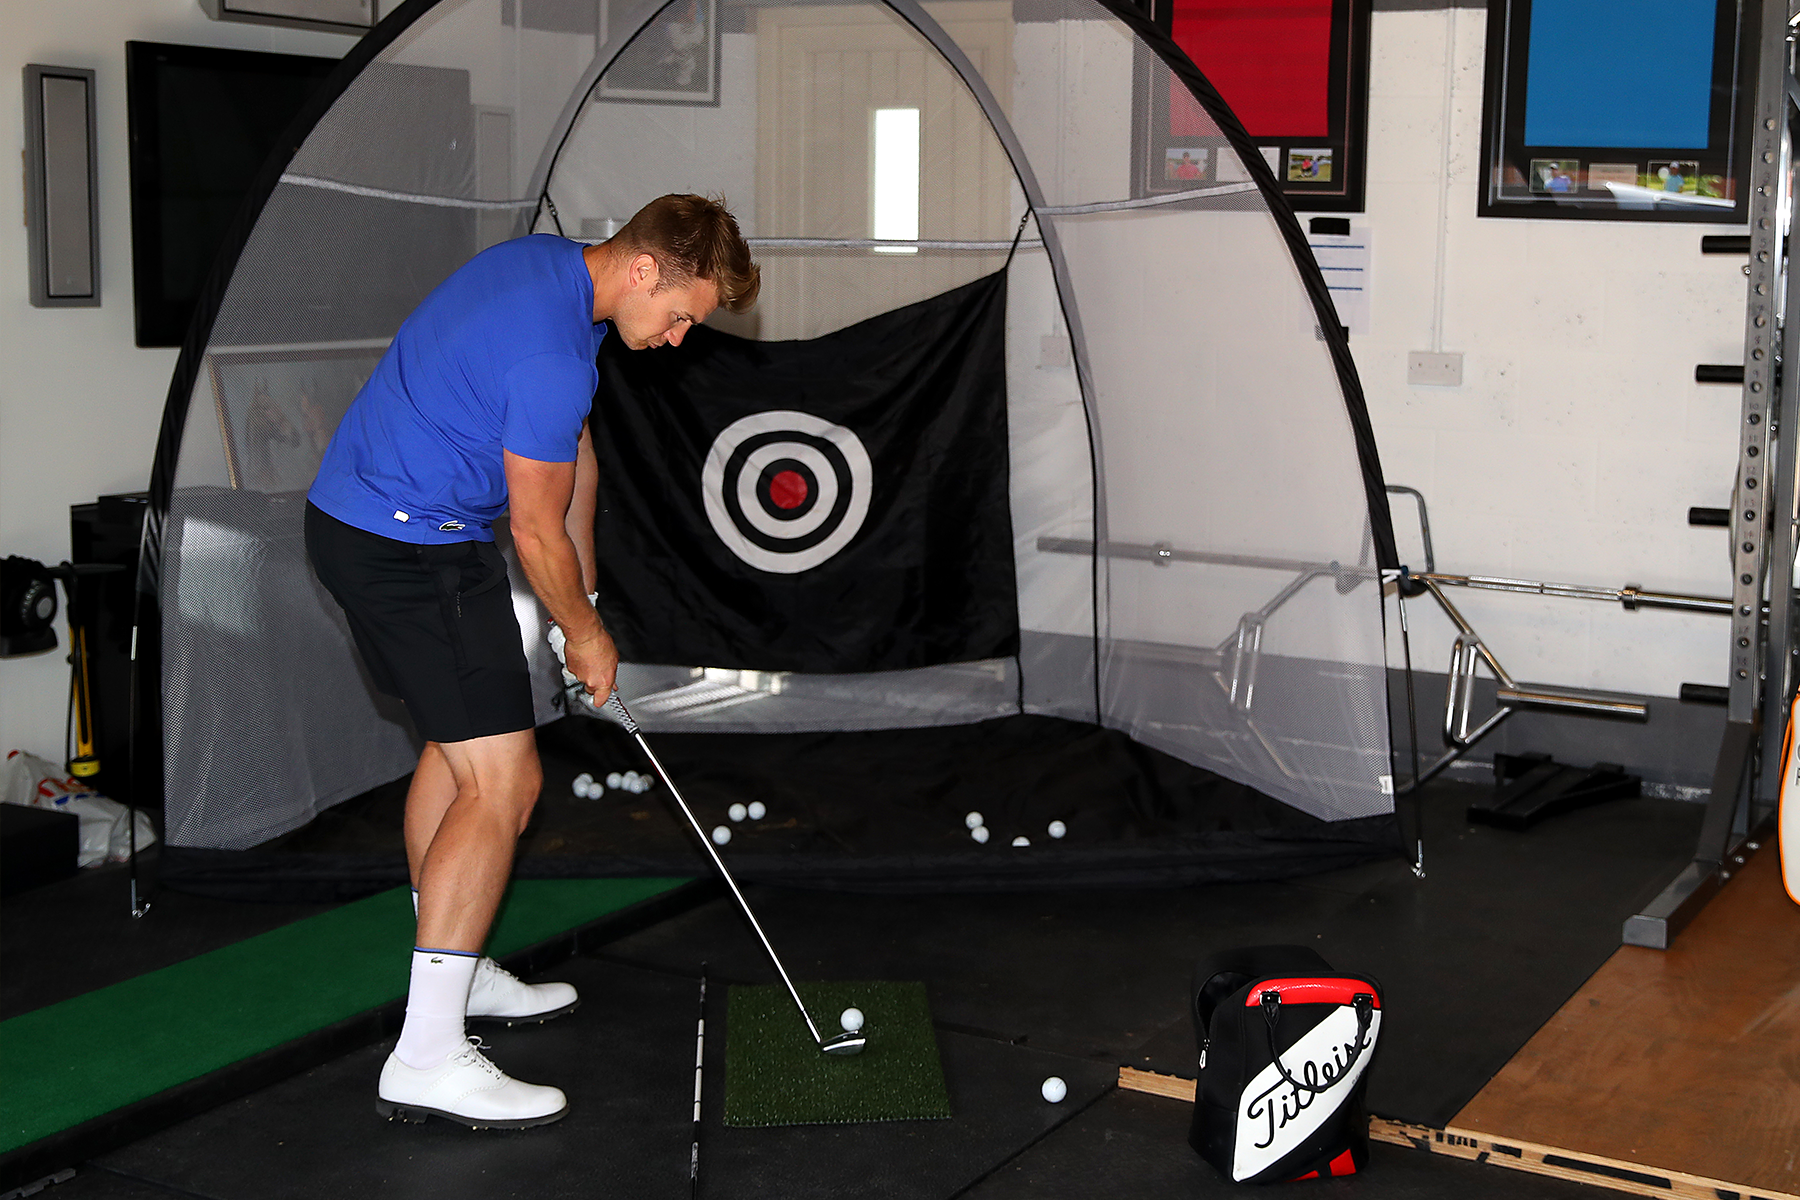 Tips For Playing Golf In The Winter - Golf Dynamics